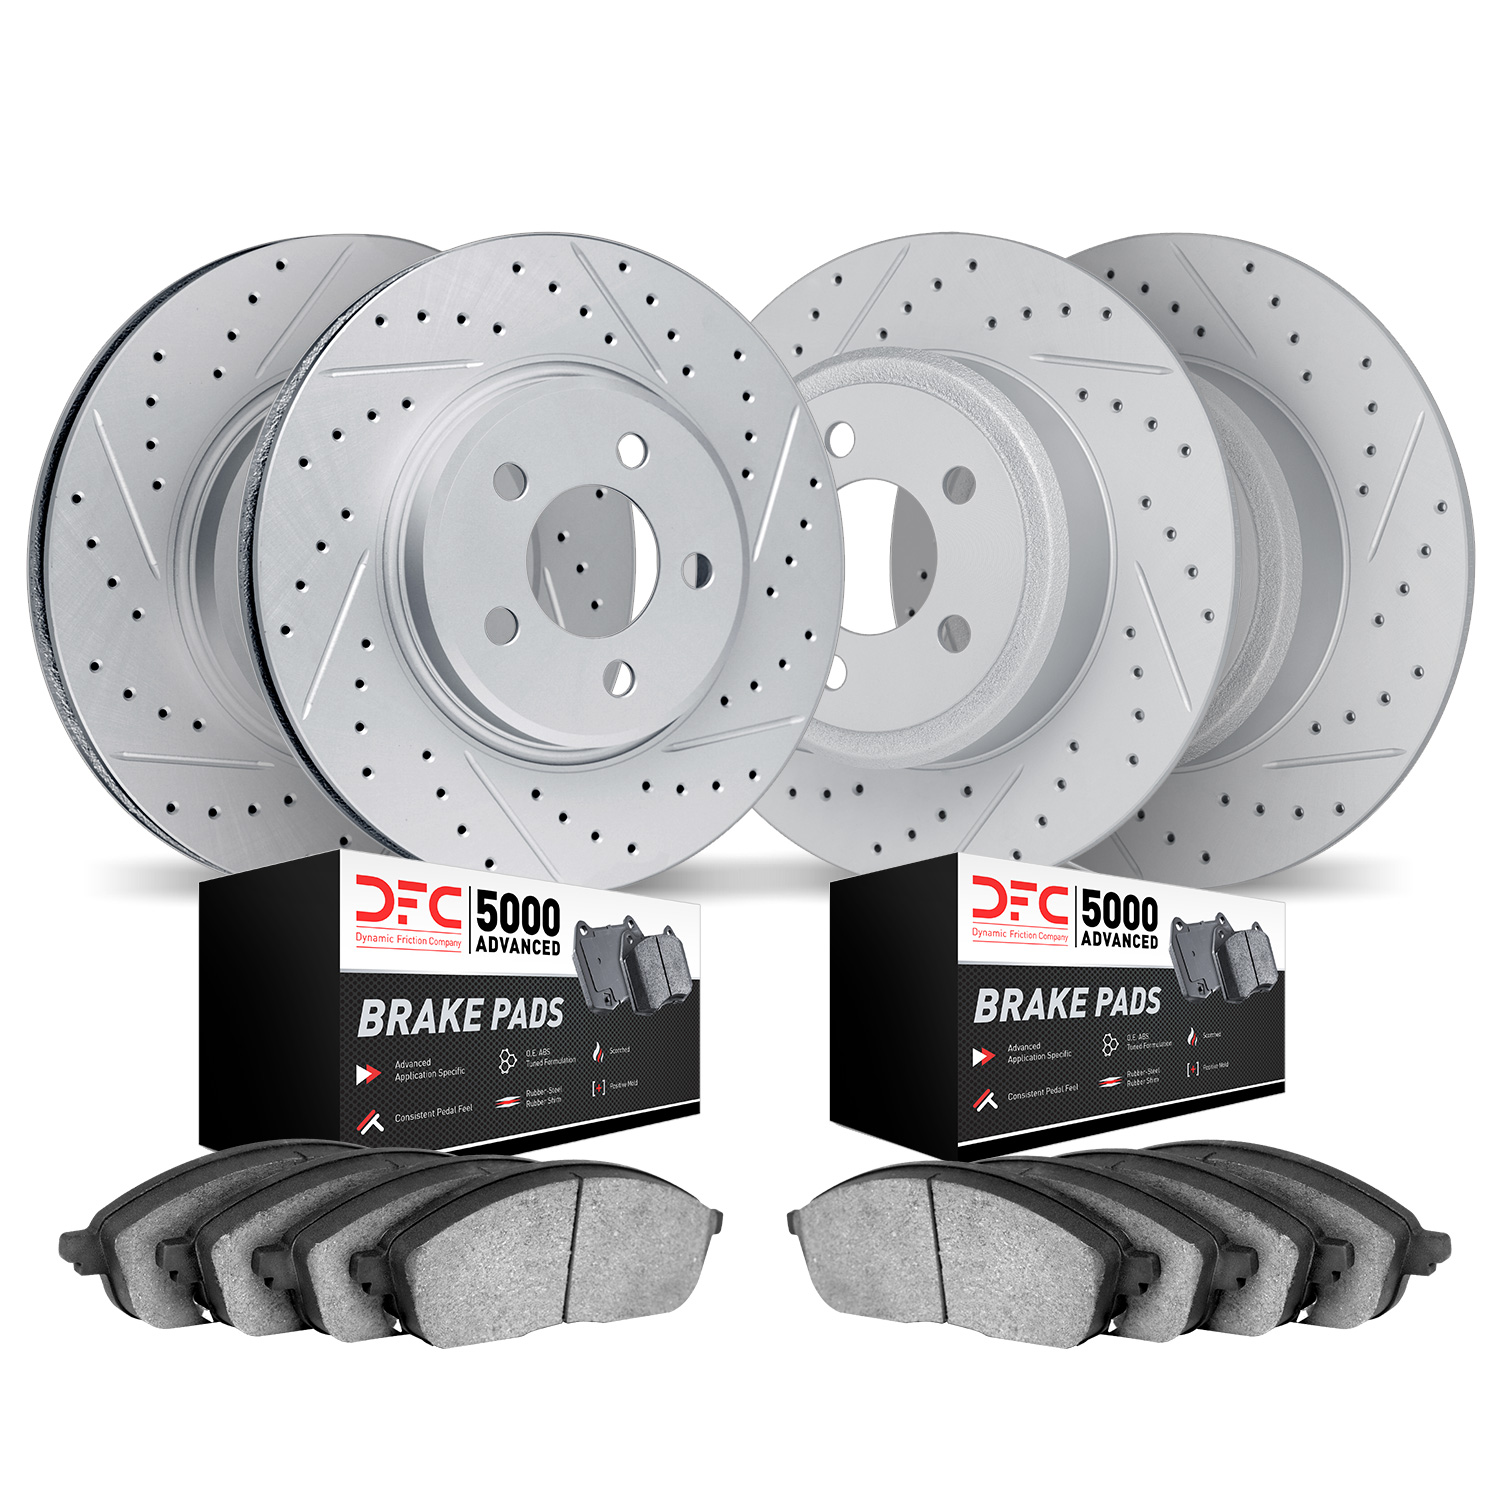 2504-59040 Geoperformance Drilled/Slotted Rotors w/5000 Advanced Brake Pads Kit, 2001-2002 Acura/Honda, Position: Front and Rear